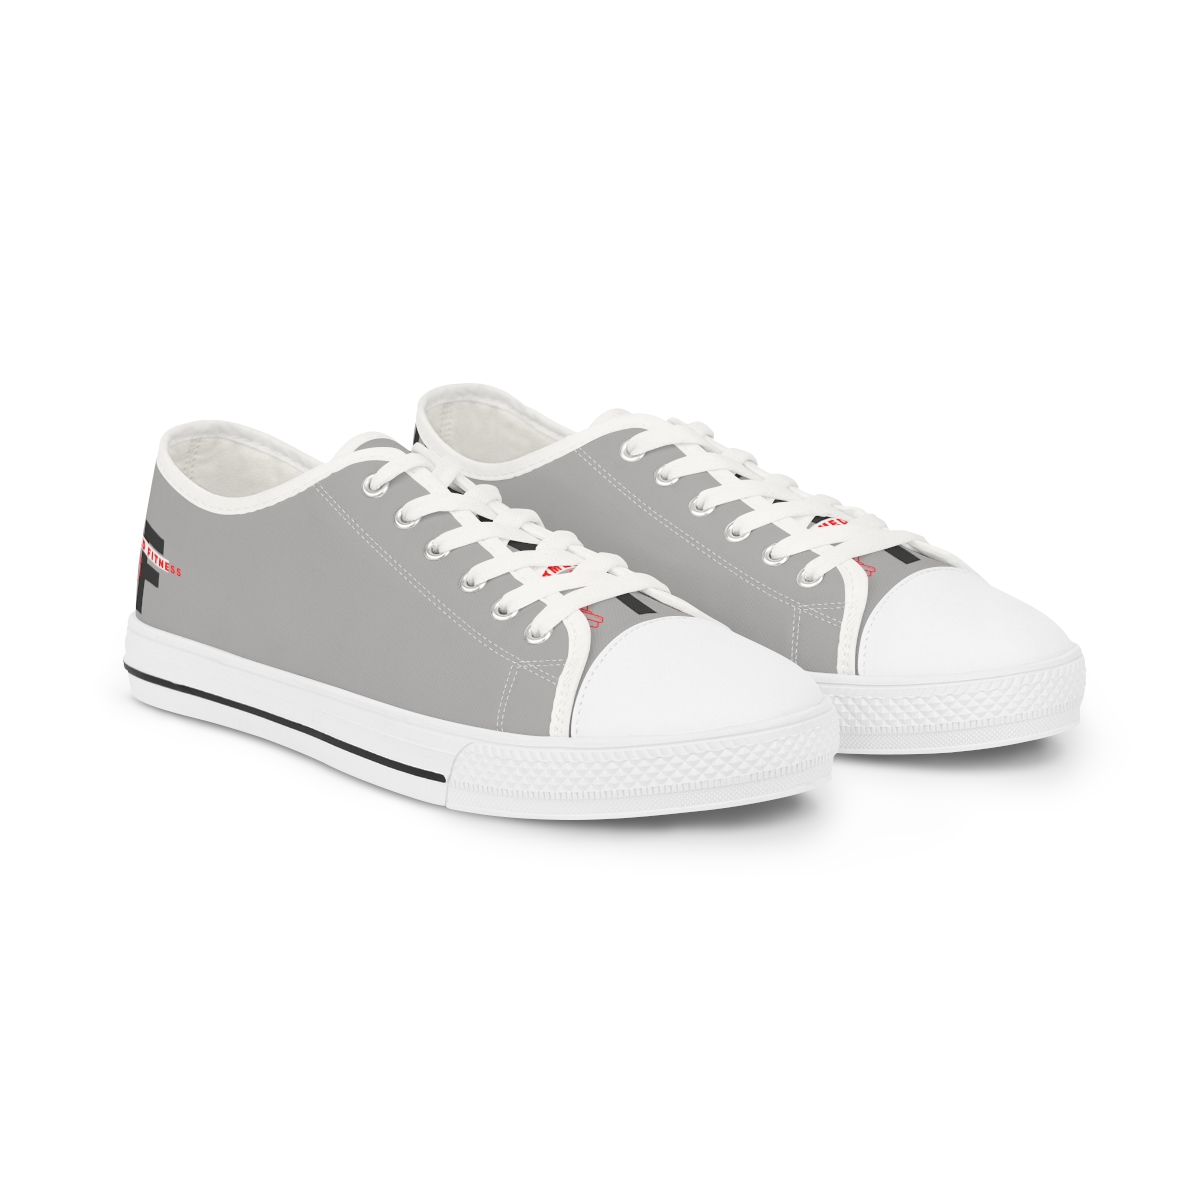 Re-Formed Fitness Sneakers product thumbnail image